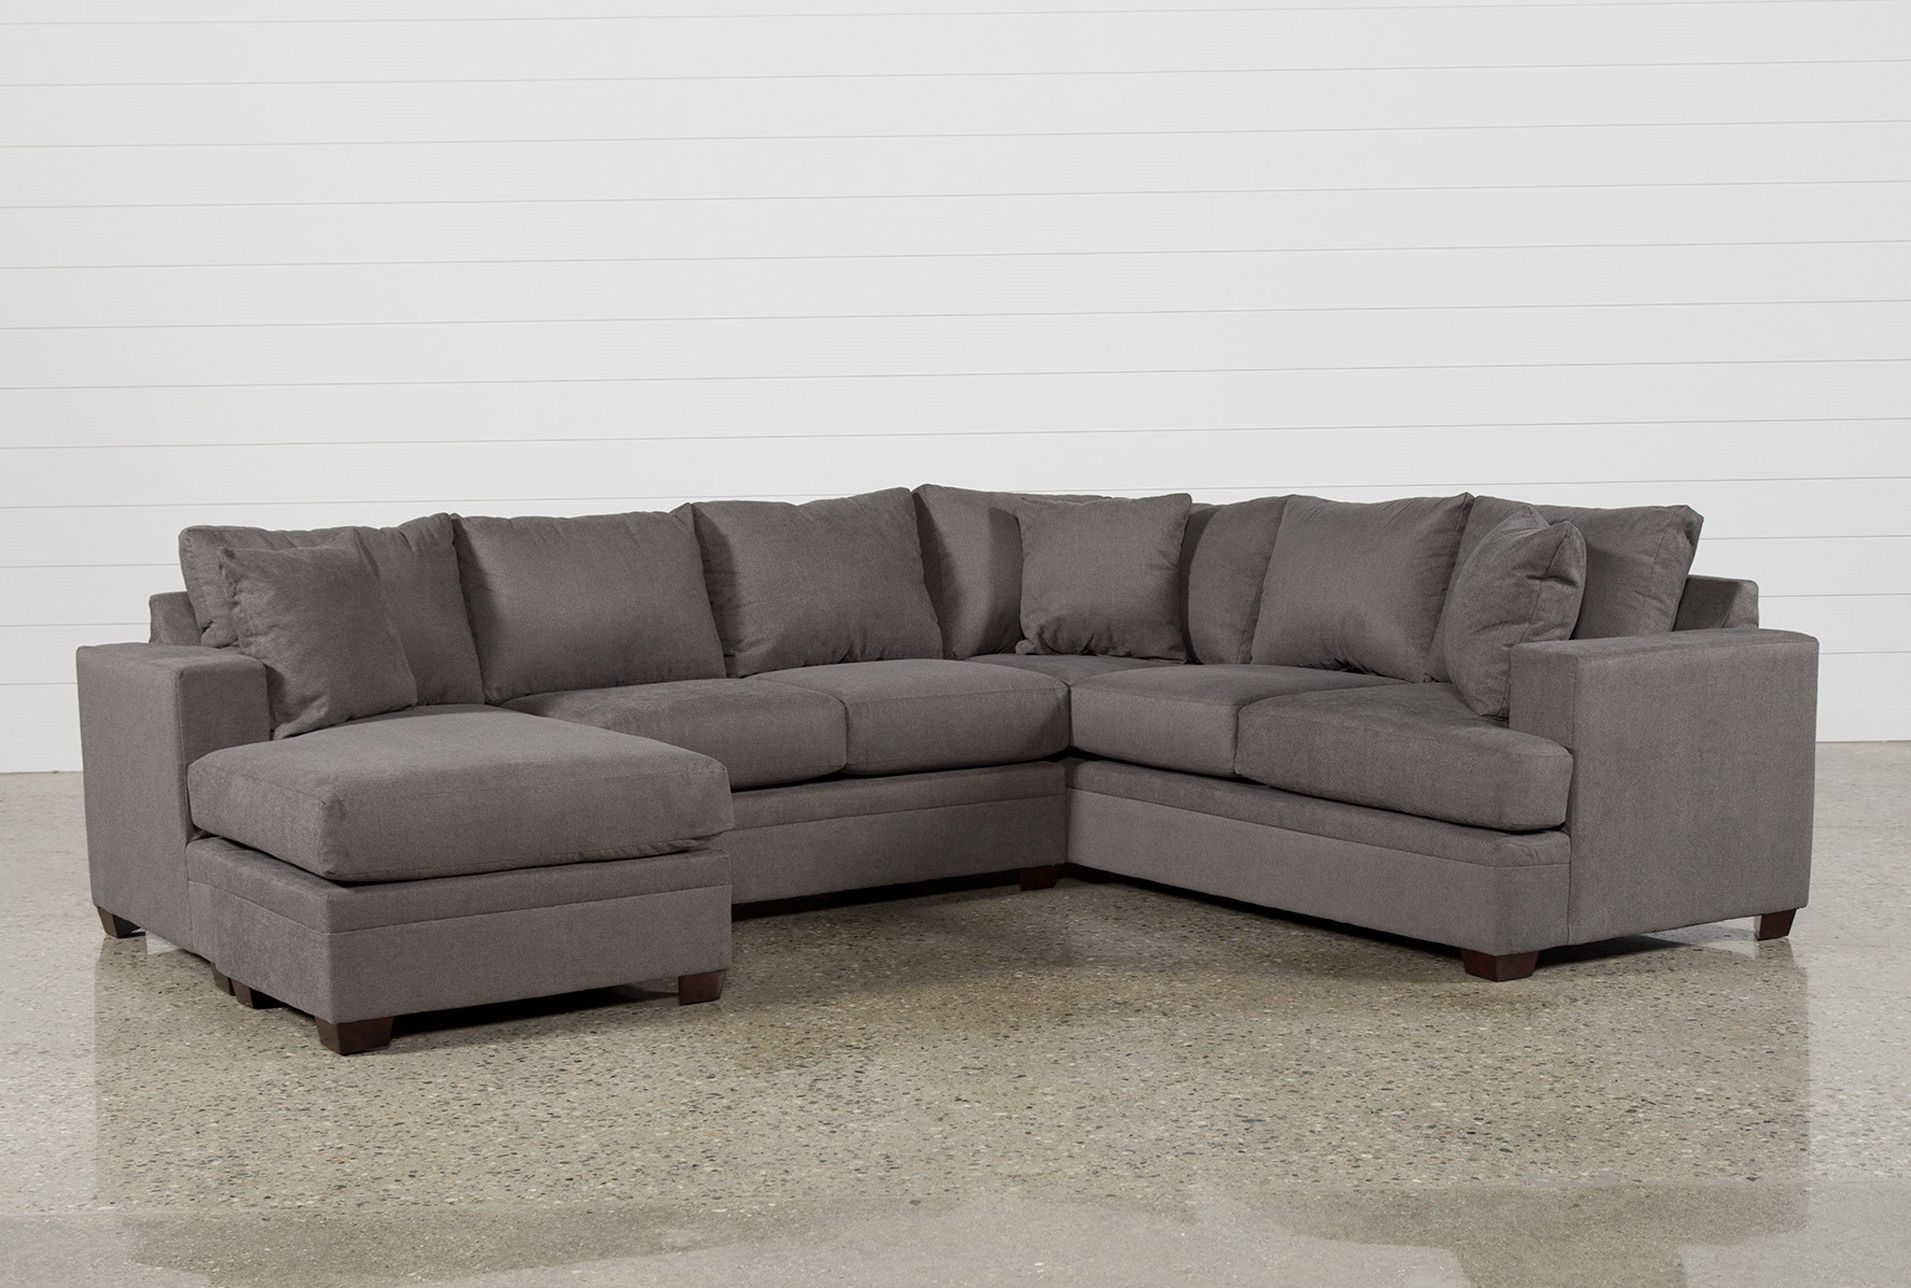 Delano 2 Piece Sectionals With Laf Oversized Chaise Within Widely Used New 2 Piece Sectional With Chaise Lounge – Buildsimplehome (View 13 of 20)